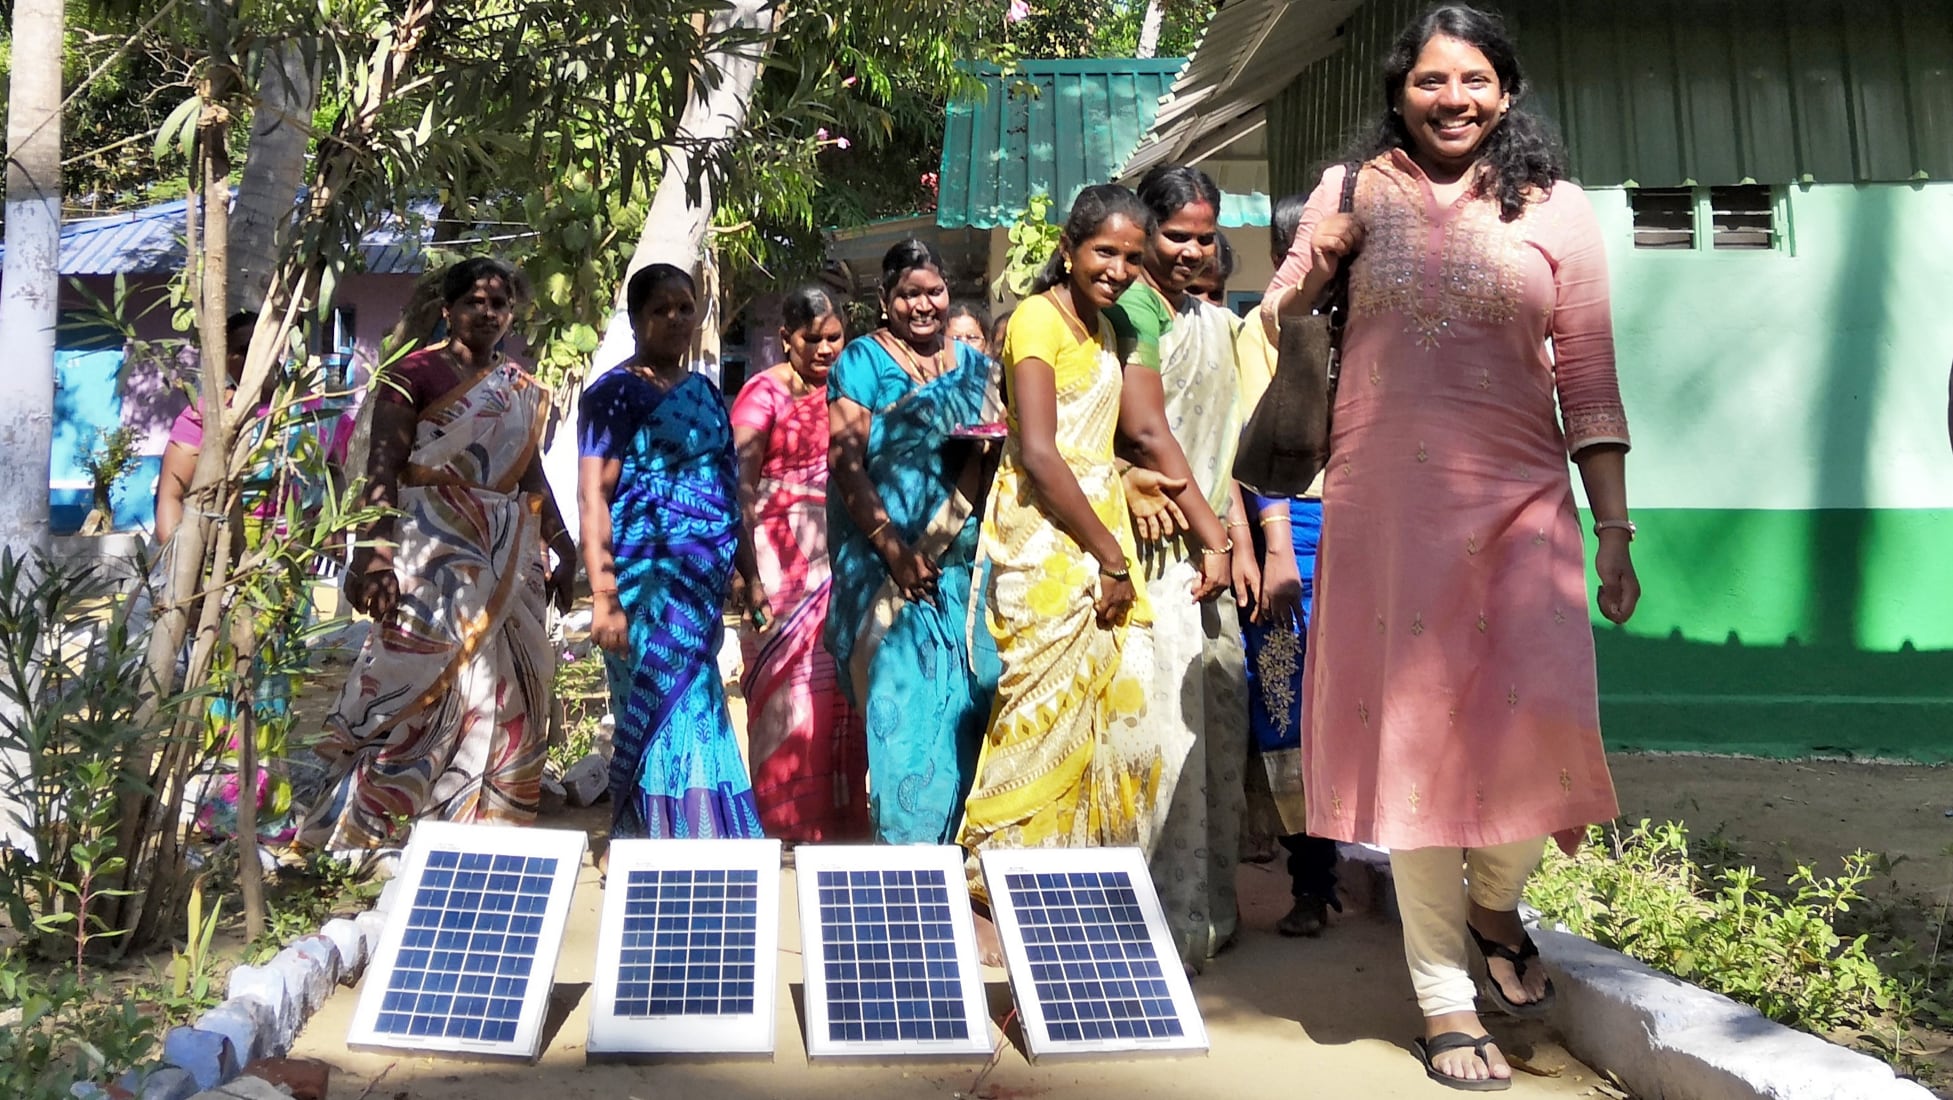 Eight Indian women smiling, wearing brightly colored dresses, standing behind four small solar panels in a row on the ground. Sunlight shining through trees onto the women and the solar panels.